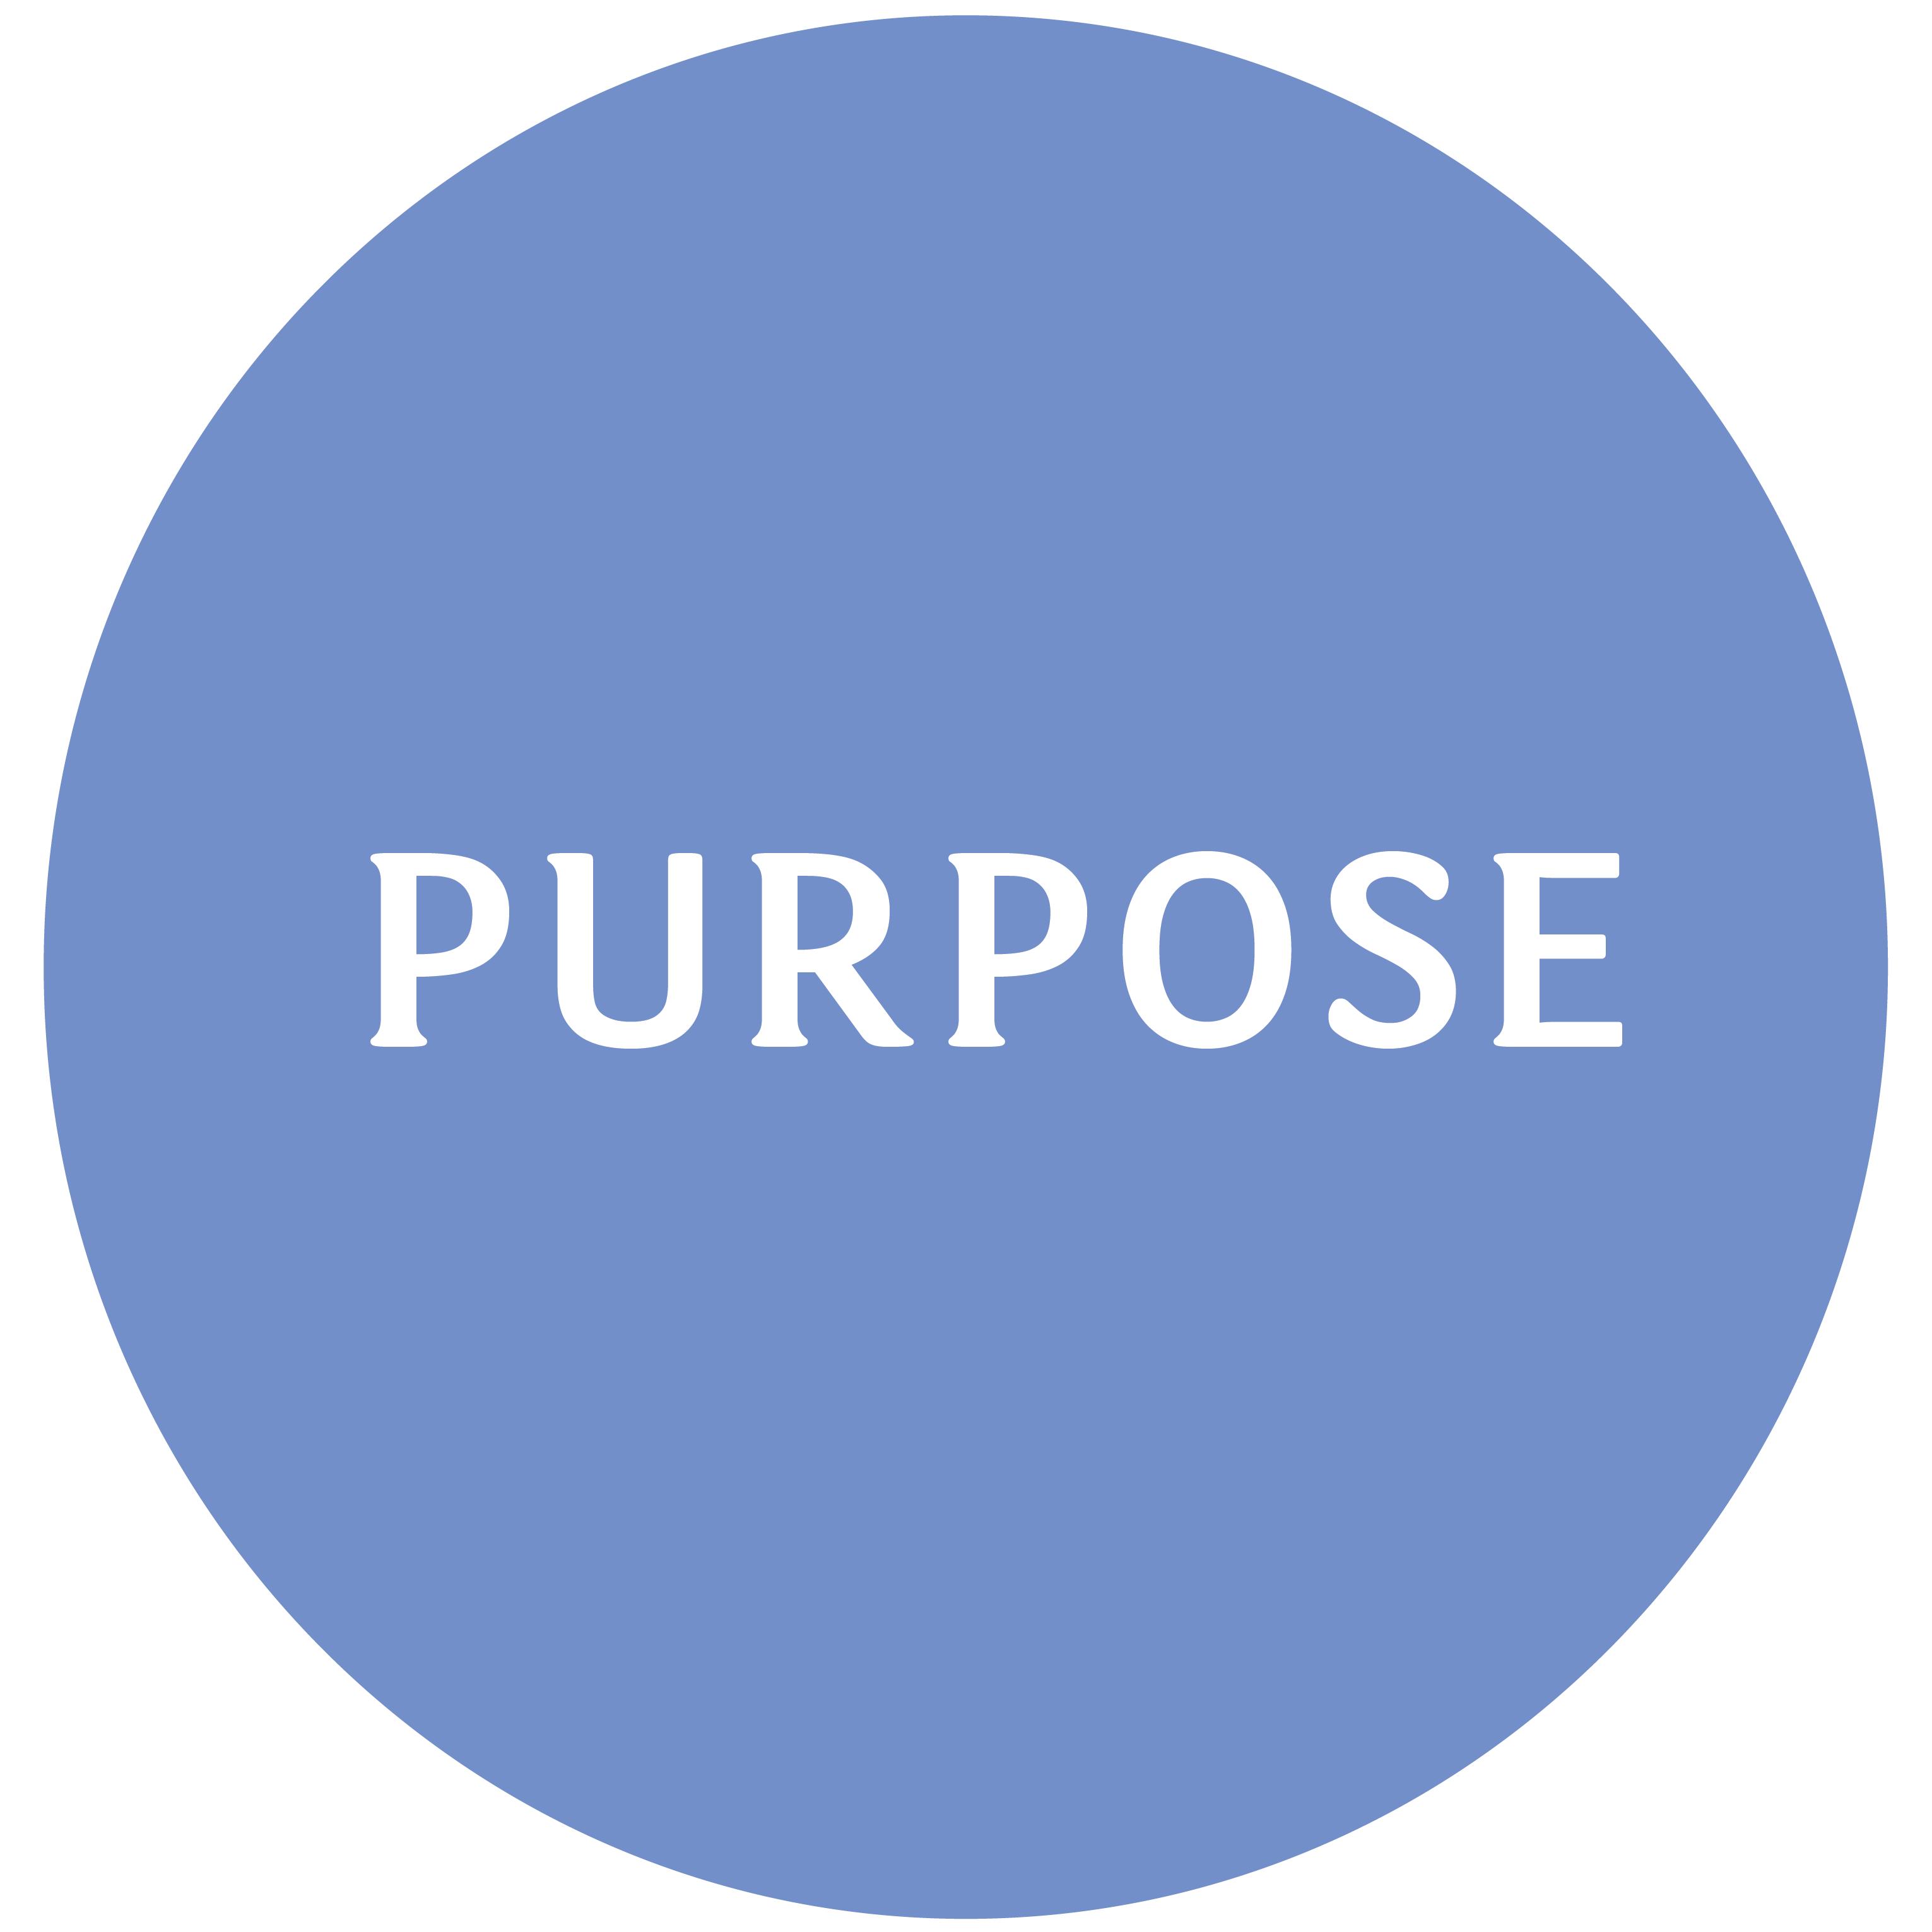 Our shared vision: purpose